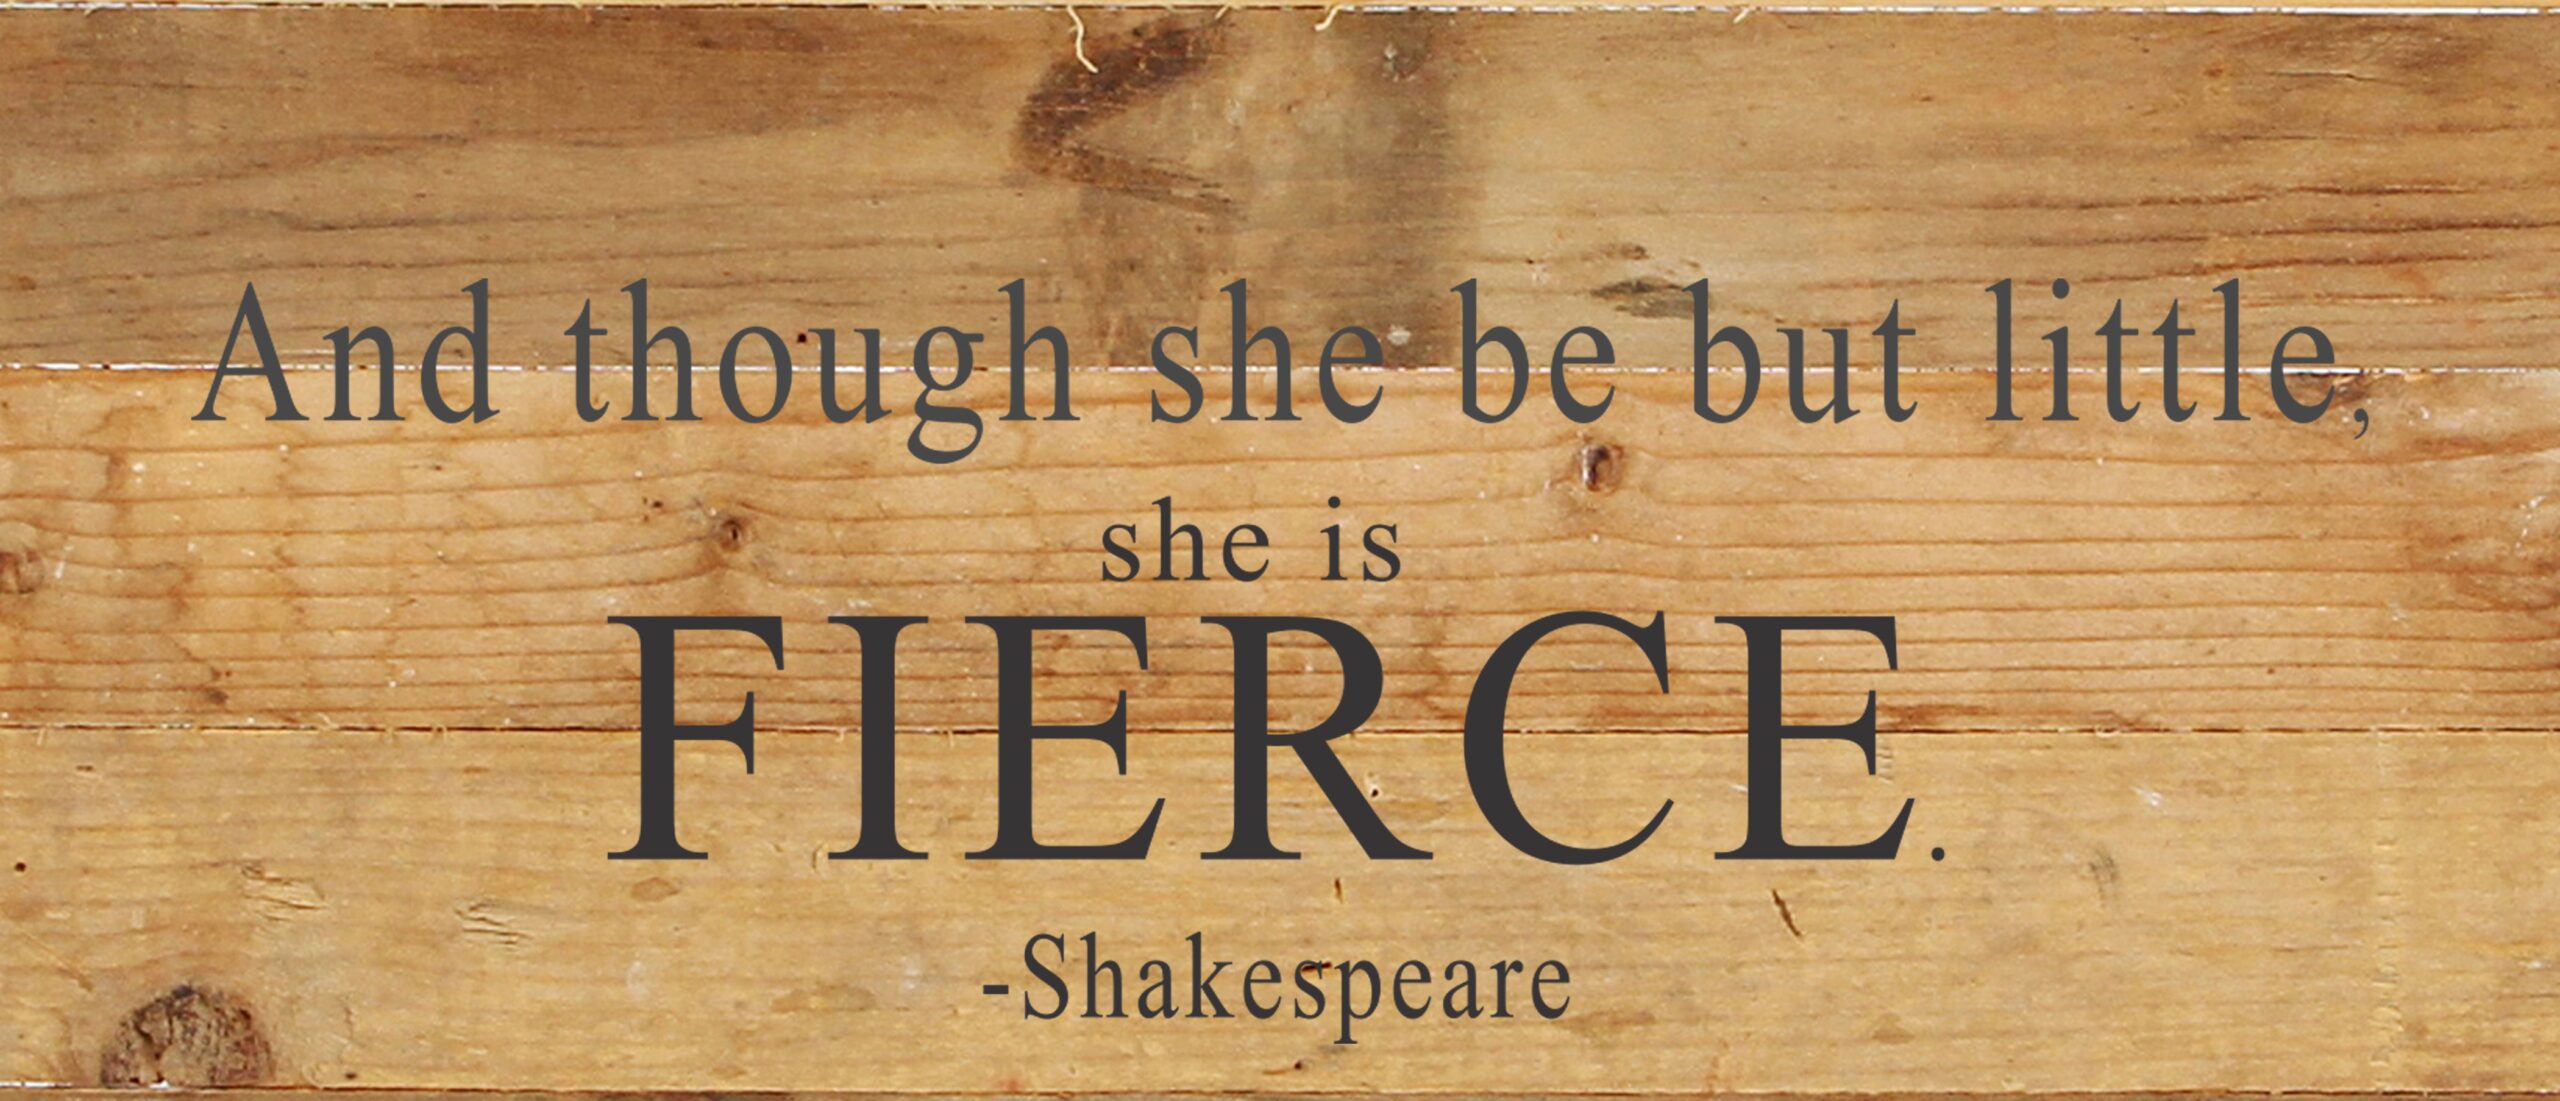 And though she be but little, she is FIERCE. / 14"x6" Reclaimed Wood Sign